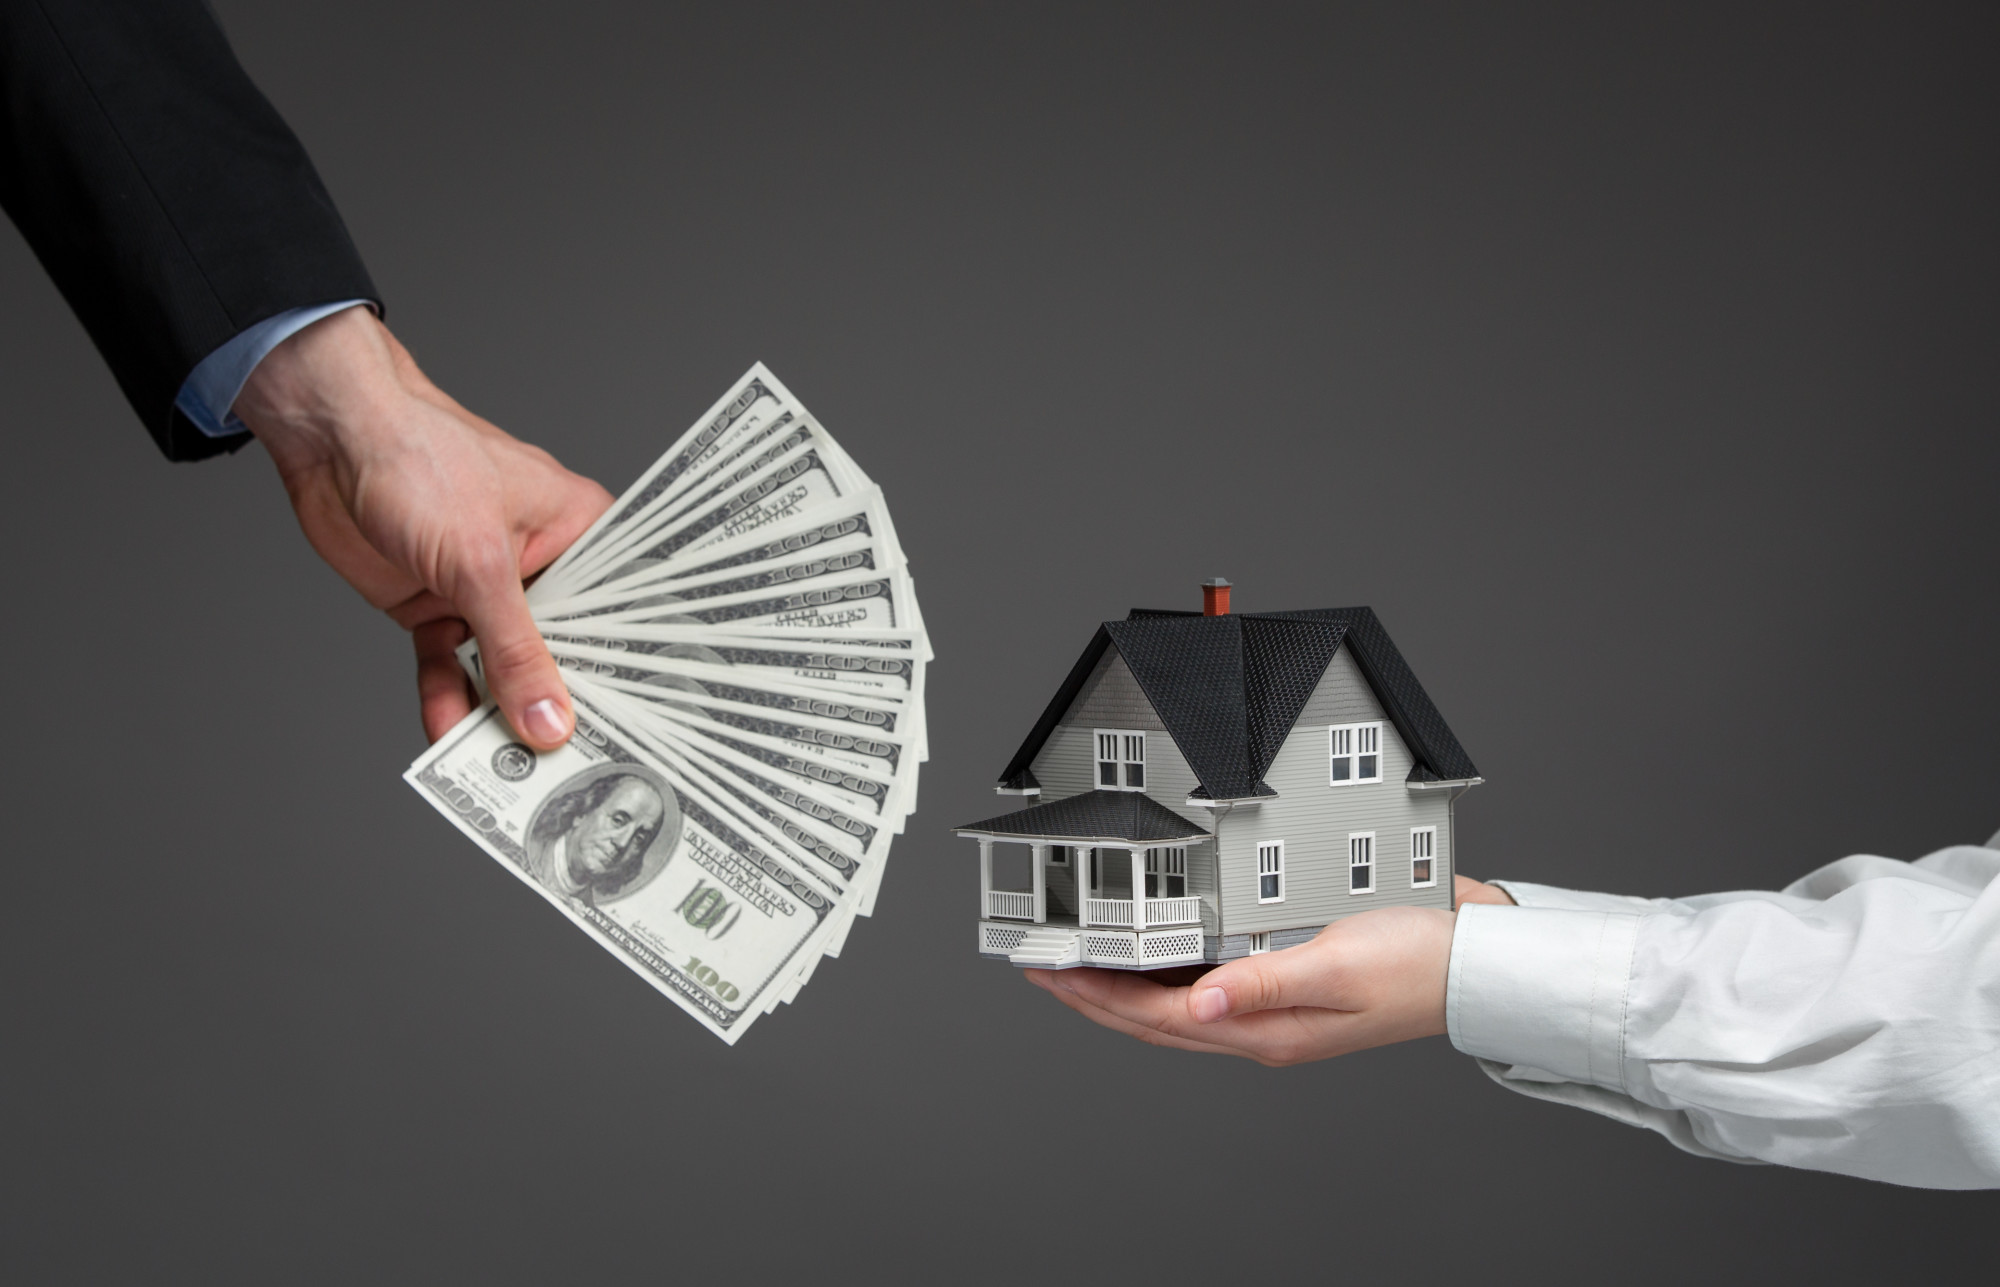 Selling Homes for Cash: 5 Benefits to Consider for Owners